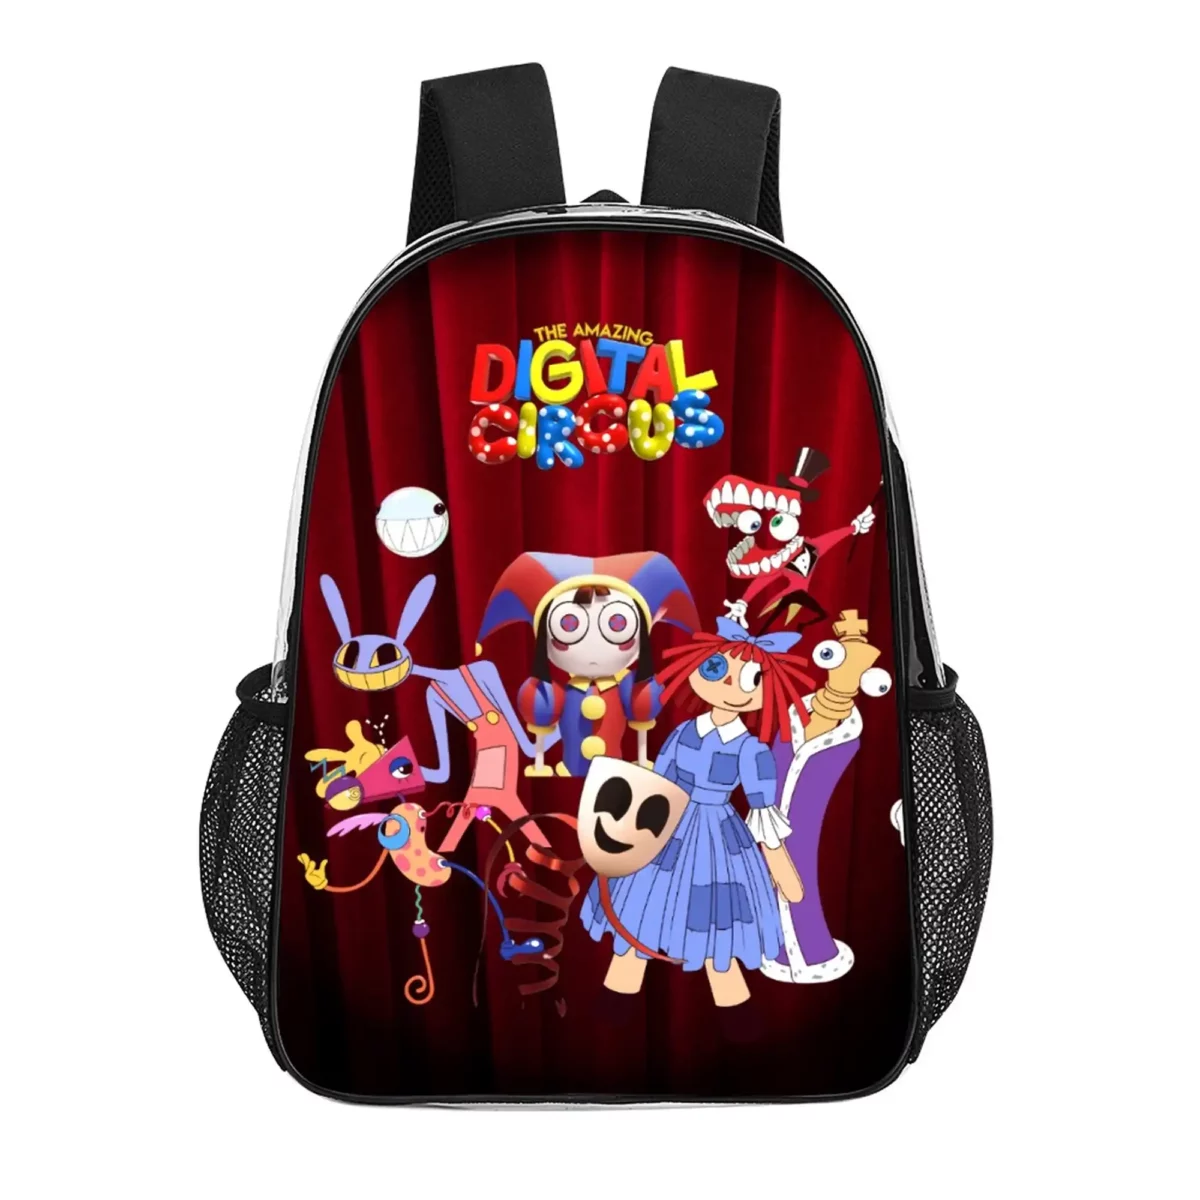 The Amazing Digital Circus Transparent Backpack – 17 Inches Book Bag Cool Kiddo 10